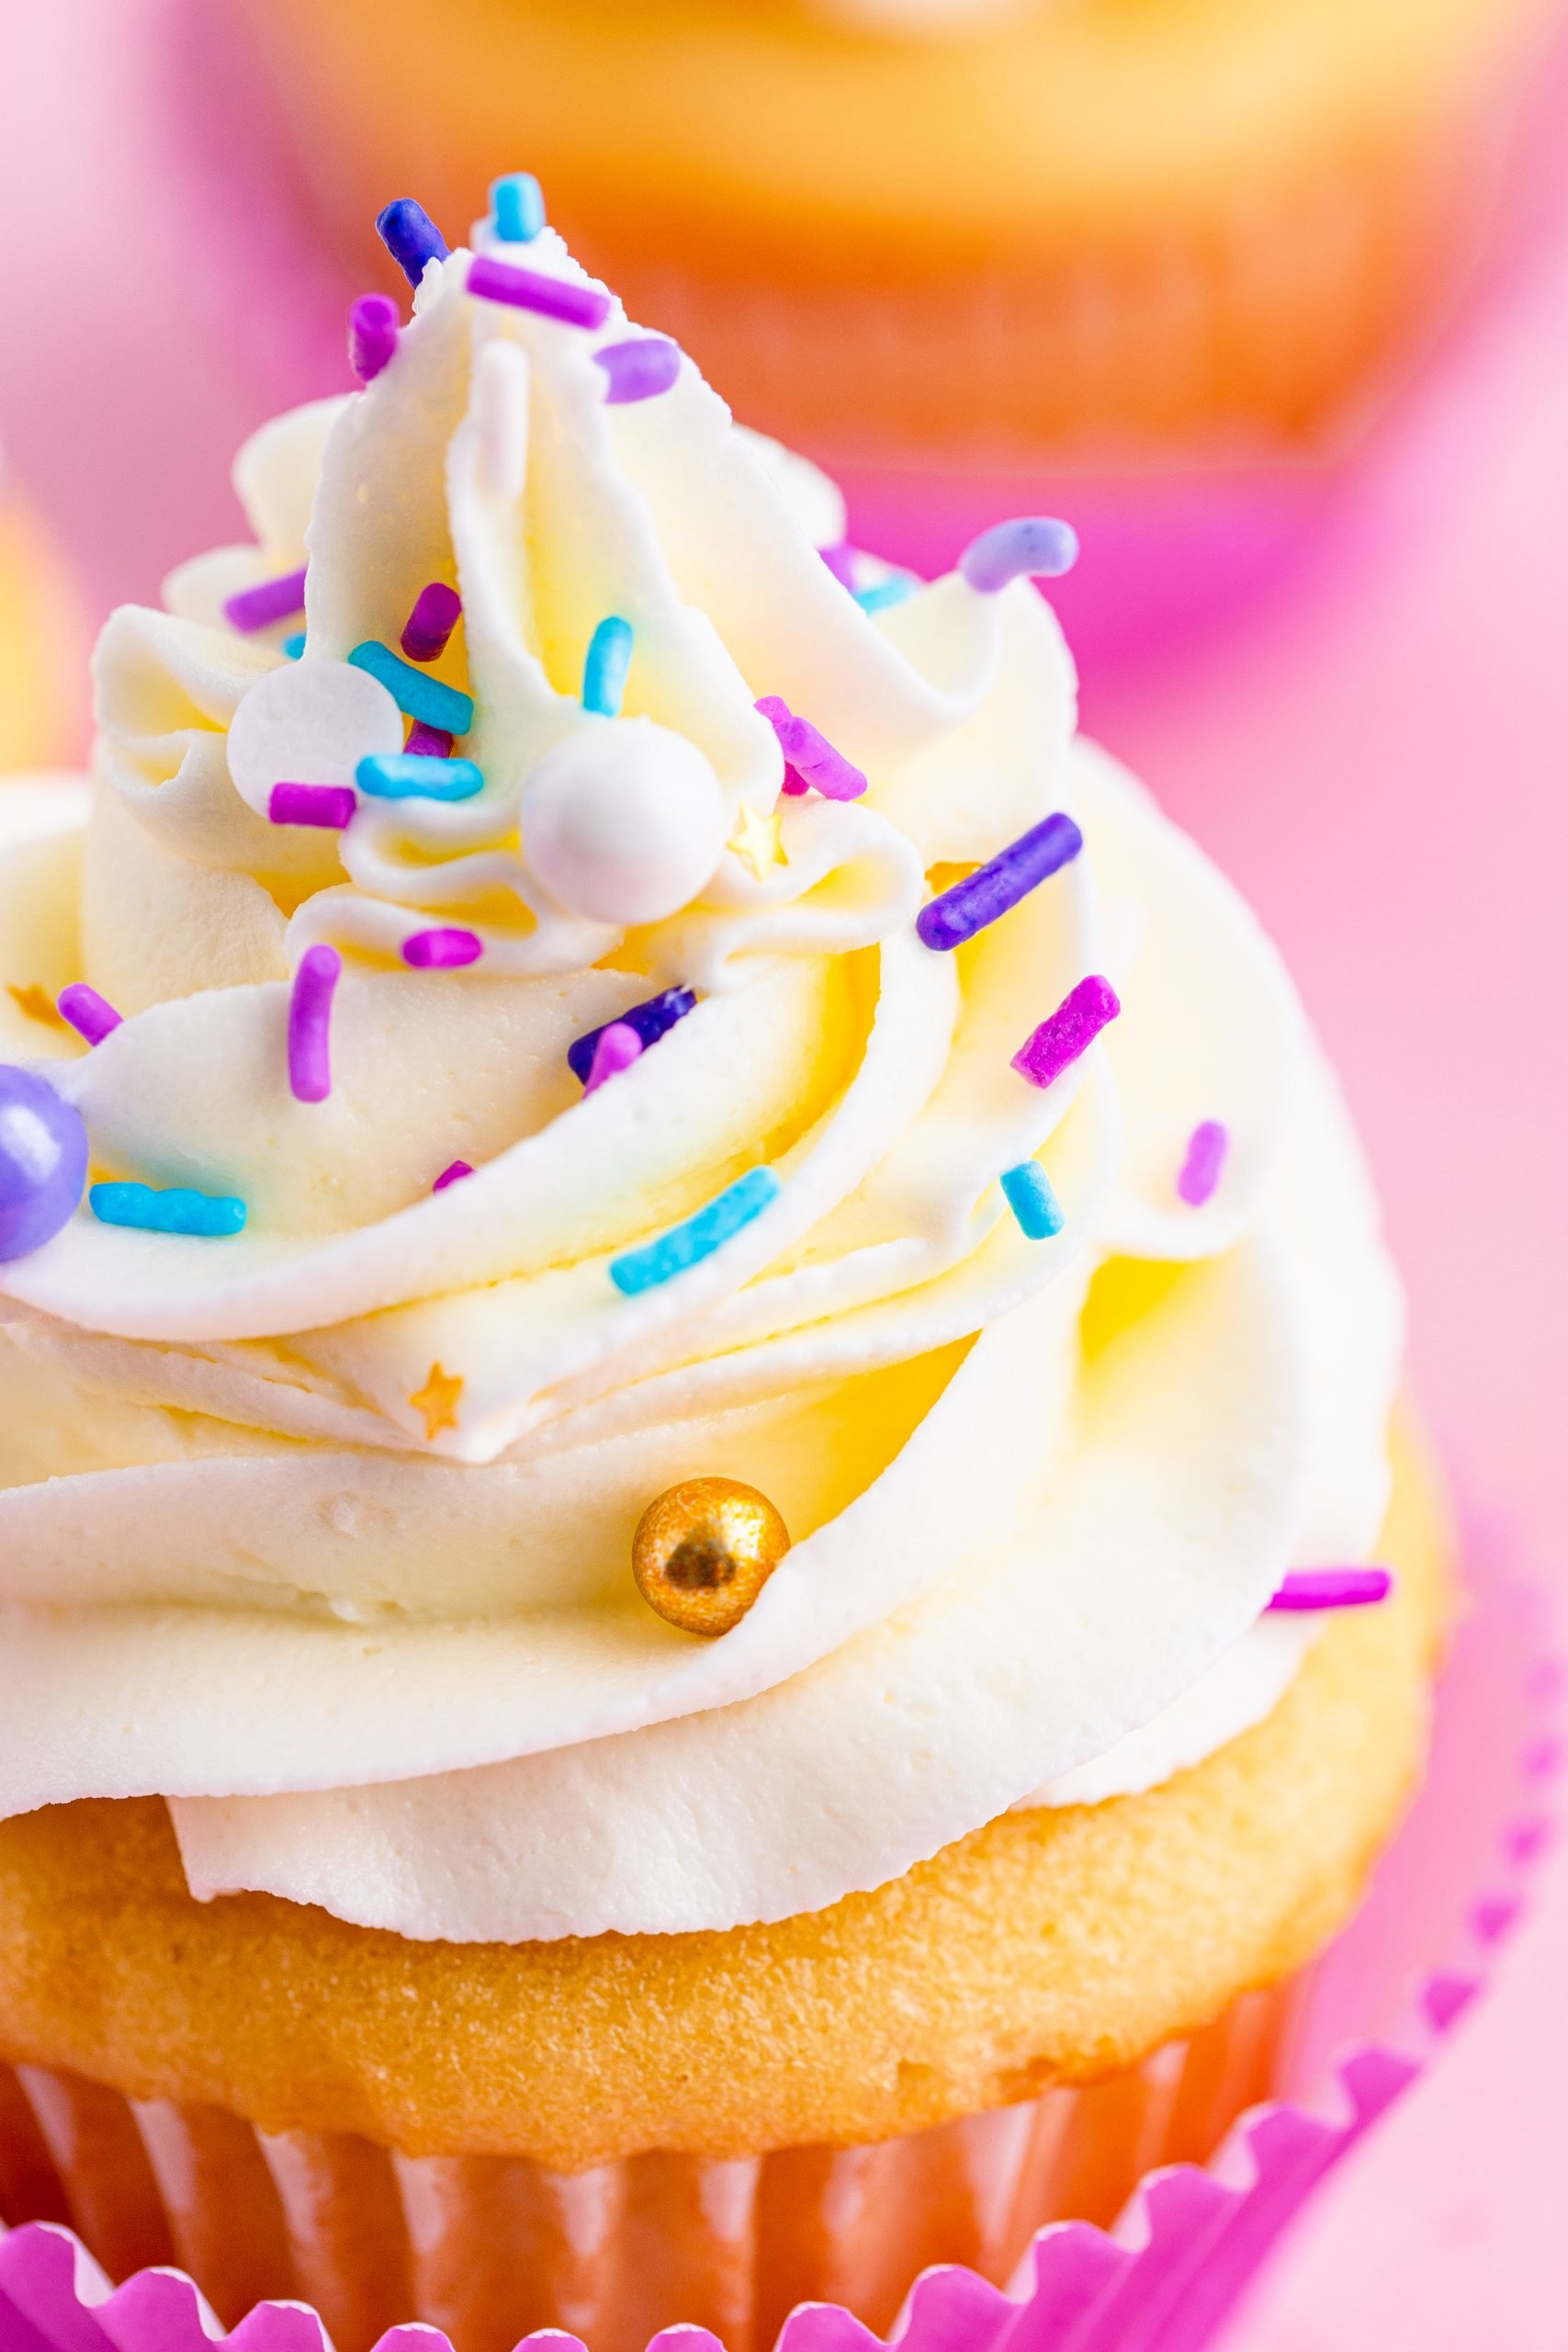 The BEST Fluffy Buttercream Frosting - Rave Reviews!